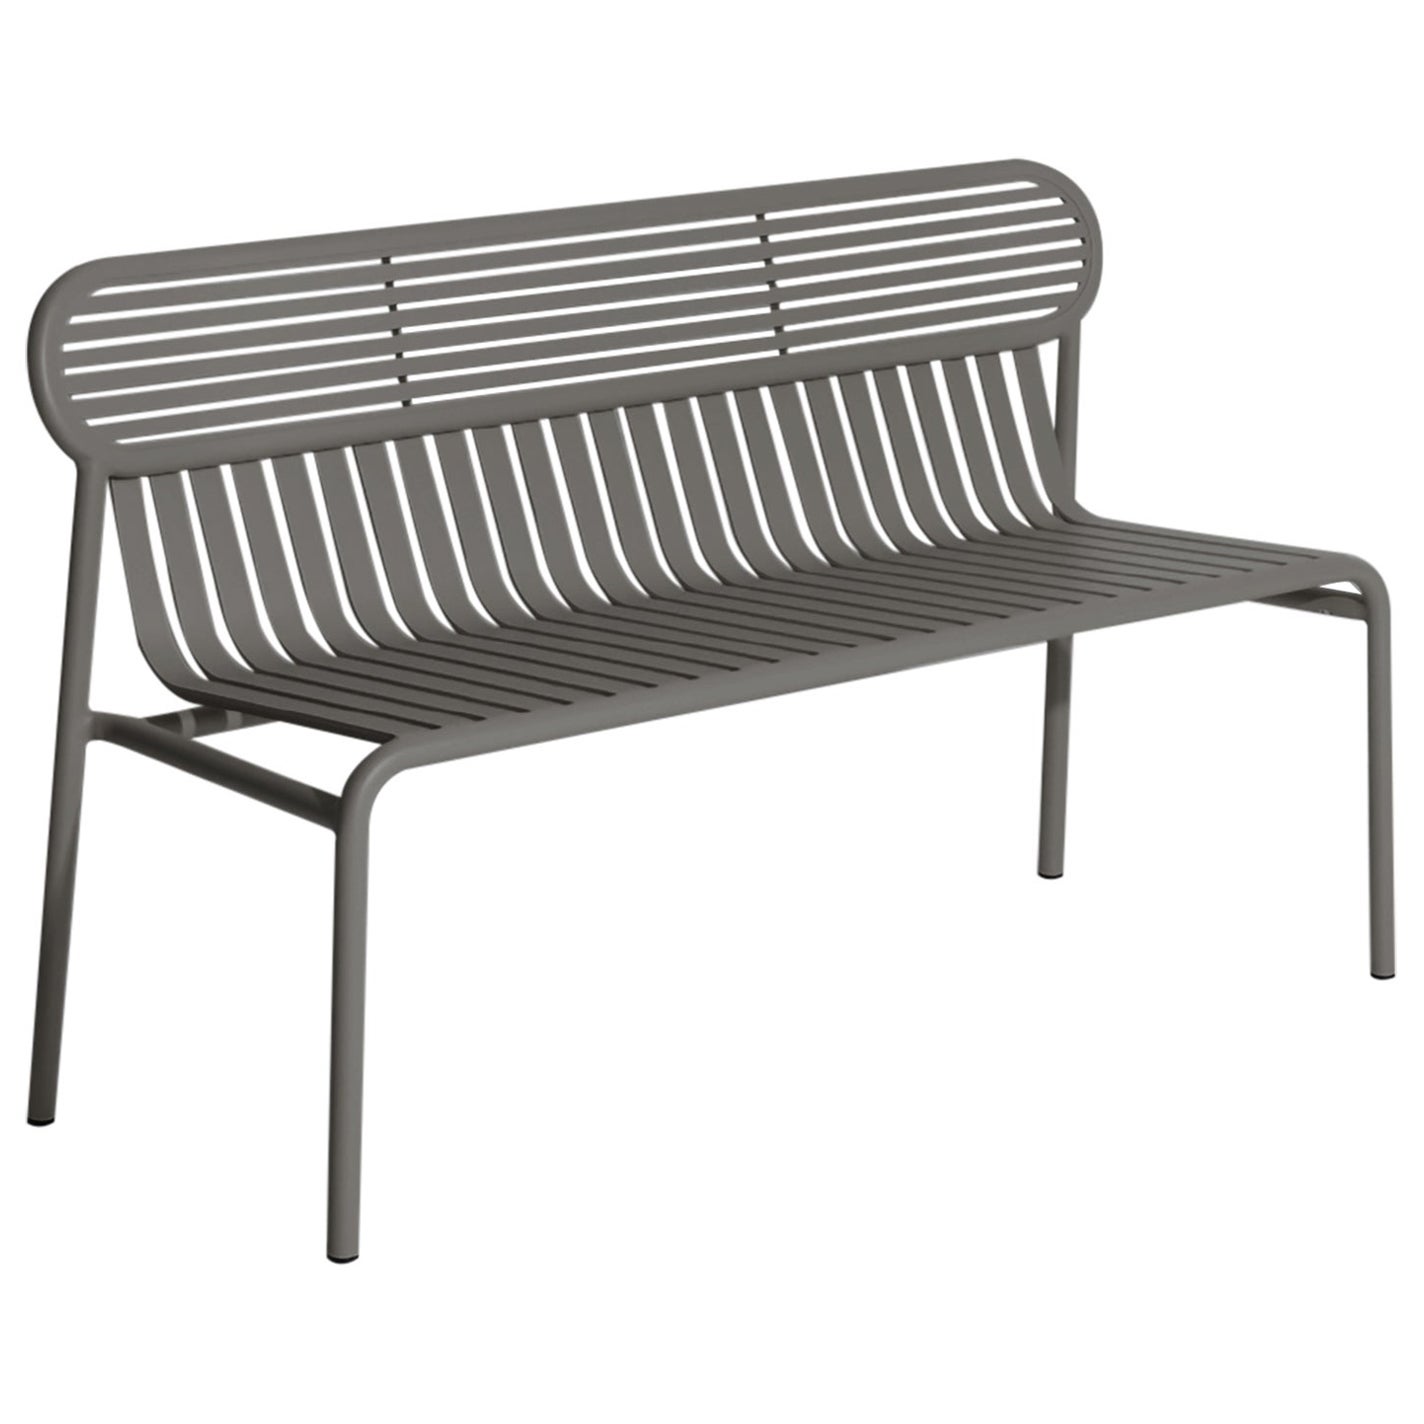 Petite Friture Week-End Bench in Anthracite Aluminium by Studio BrichetZiegler For Sale